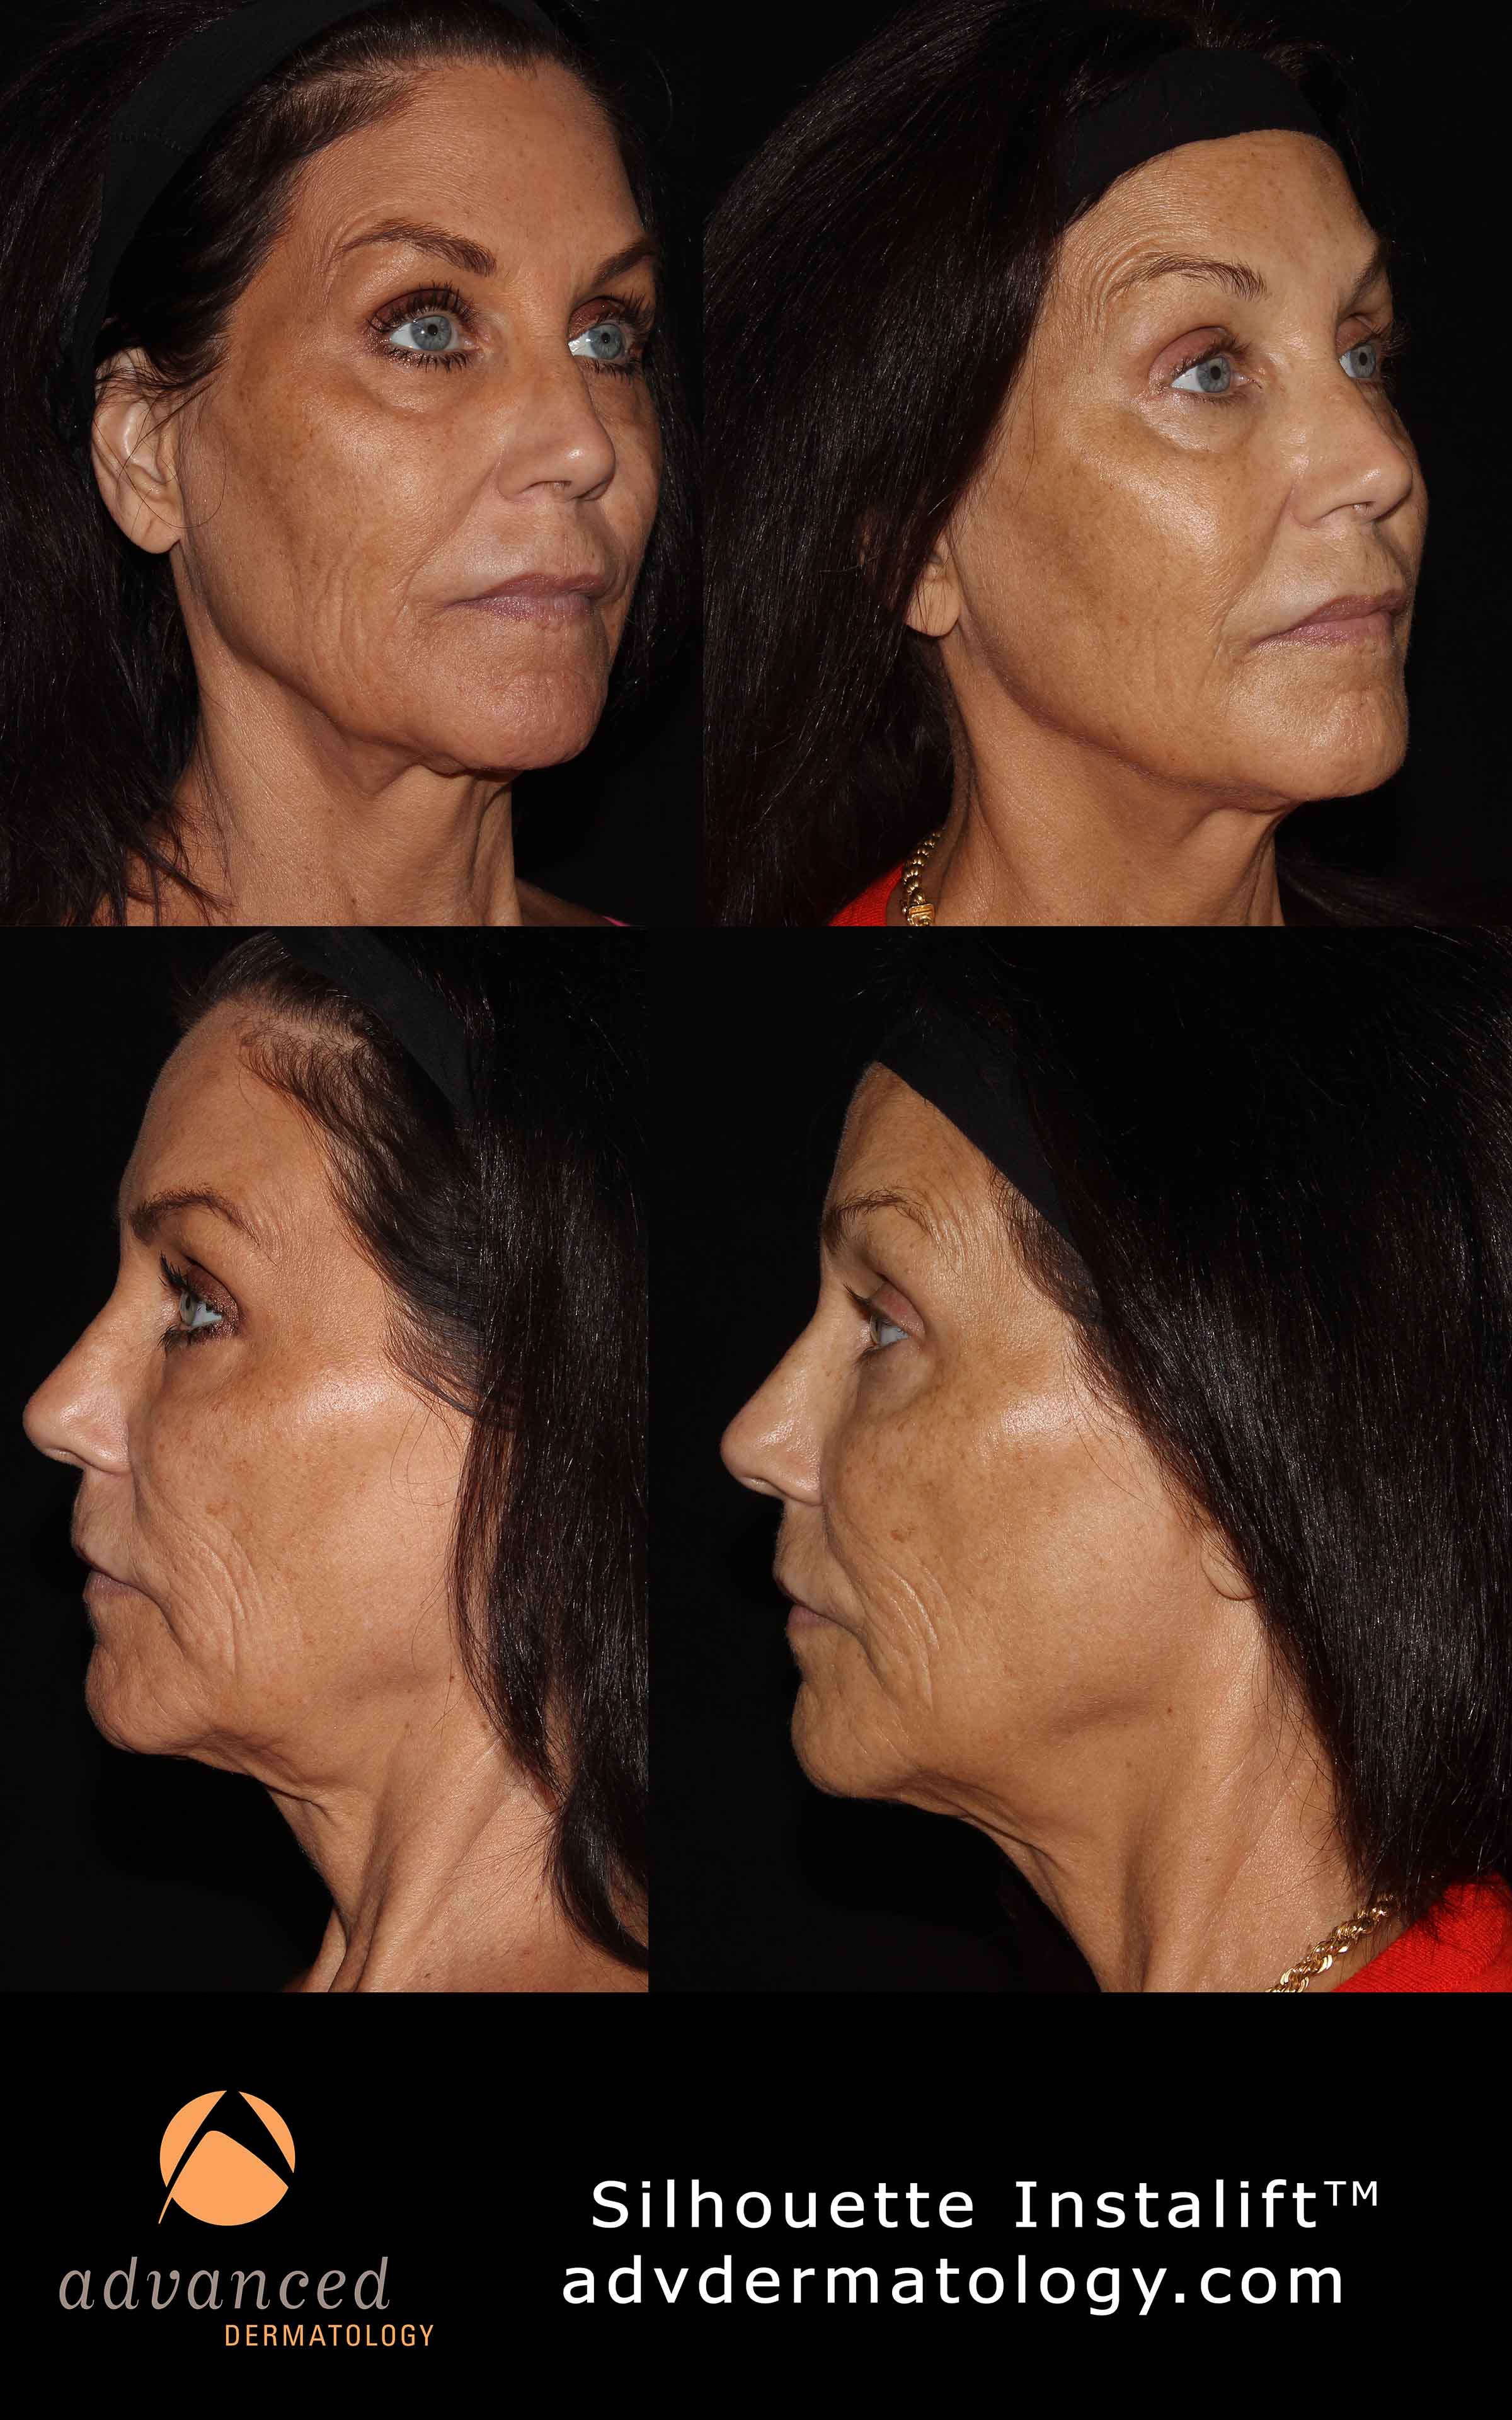 Silhouette Instalift Lifts Deep Layers Of The Skin And Re Contours Face